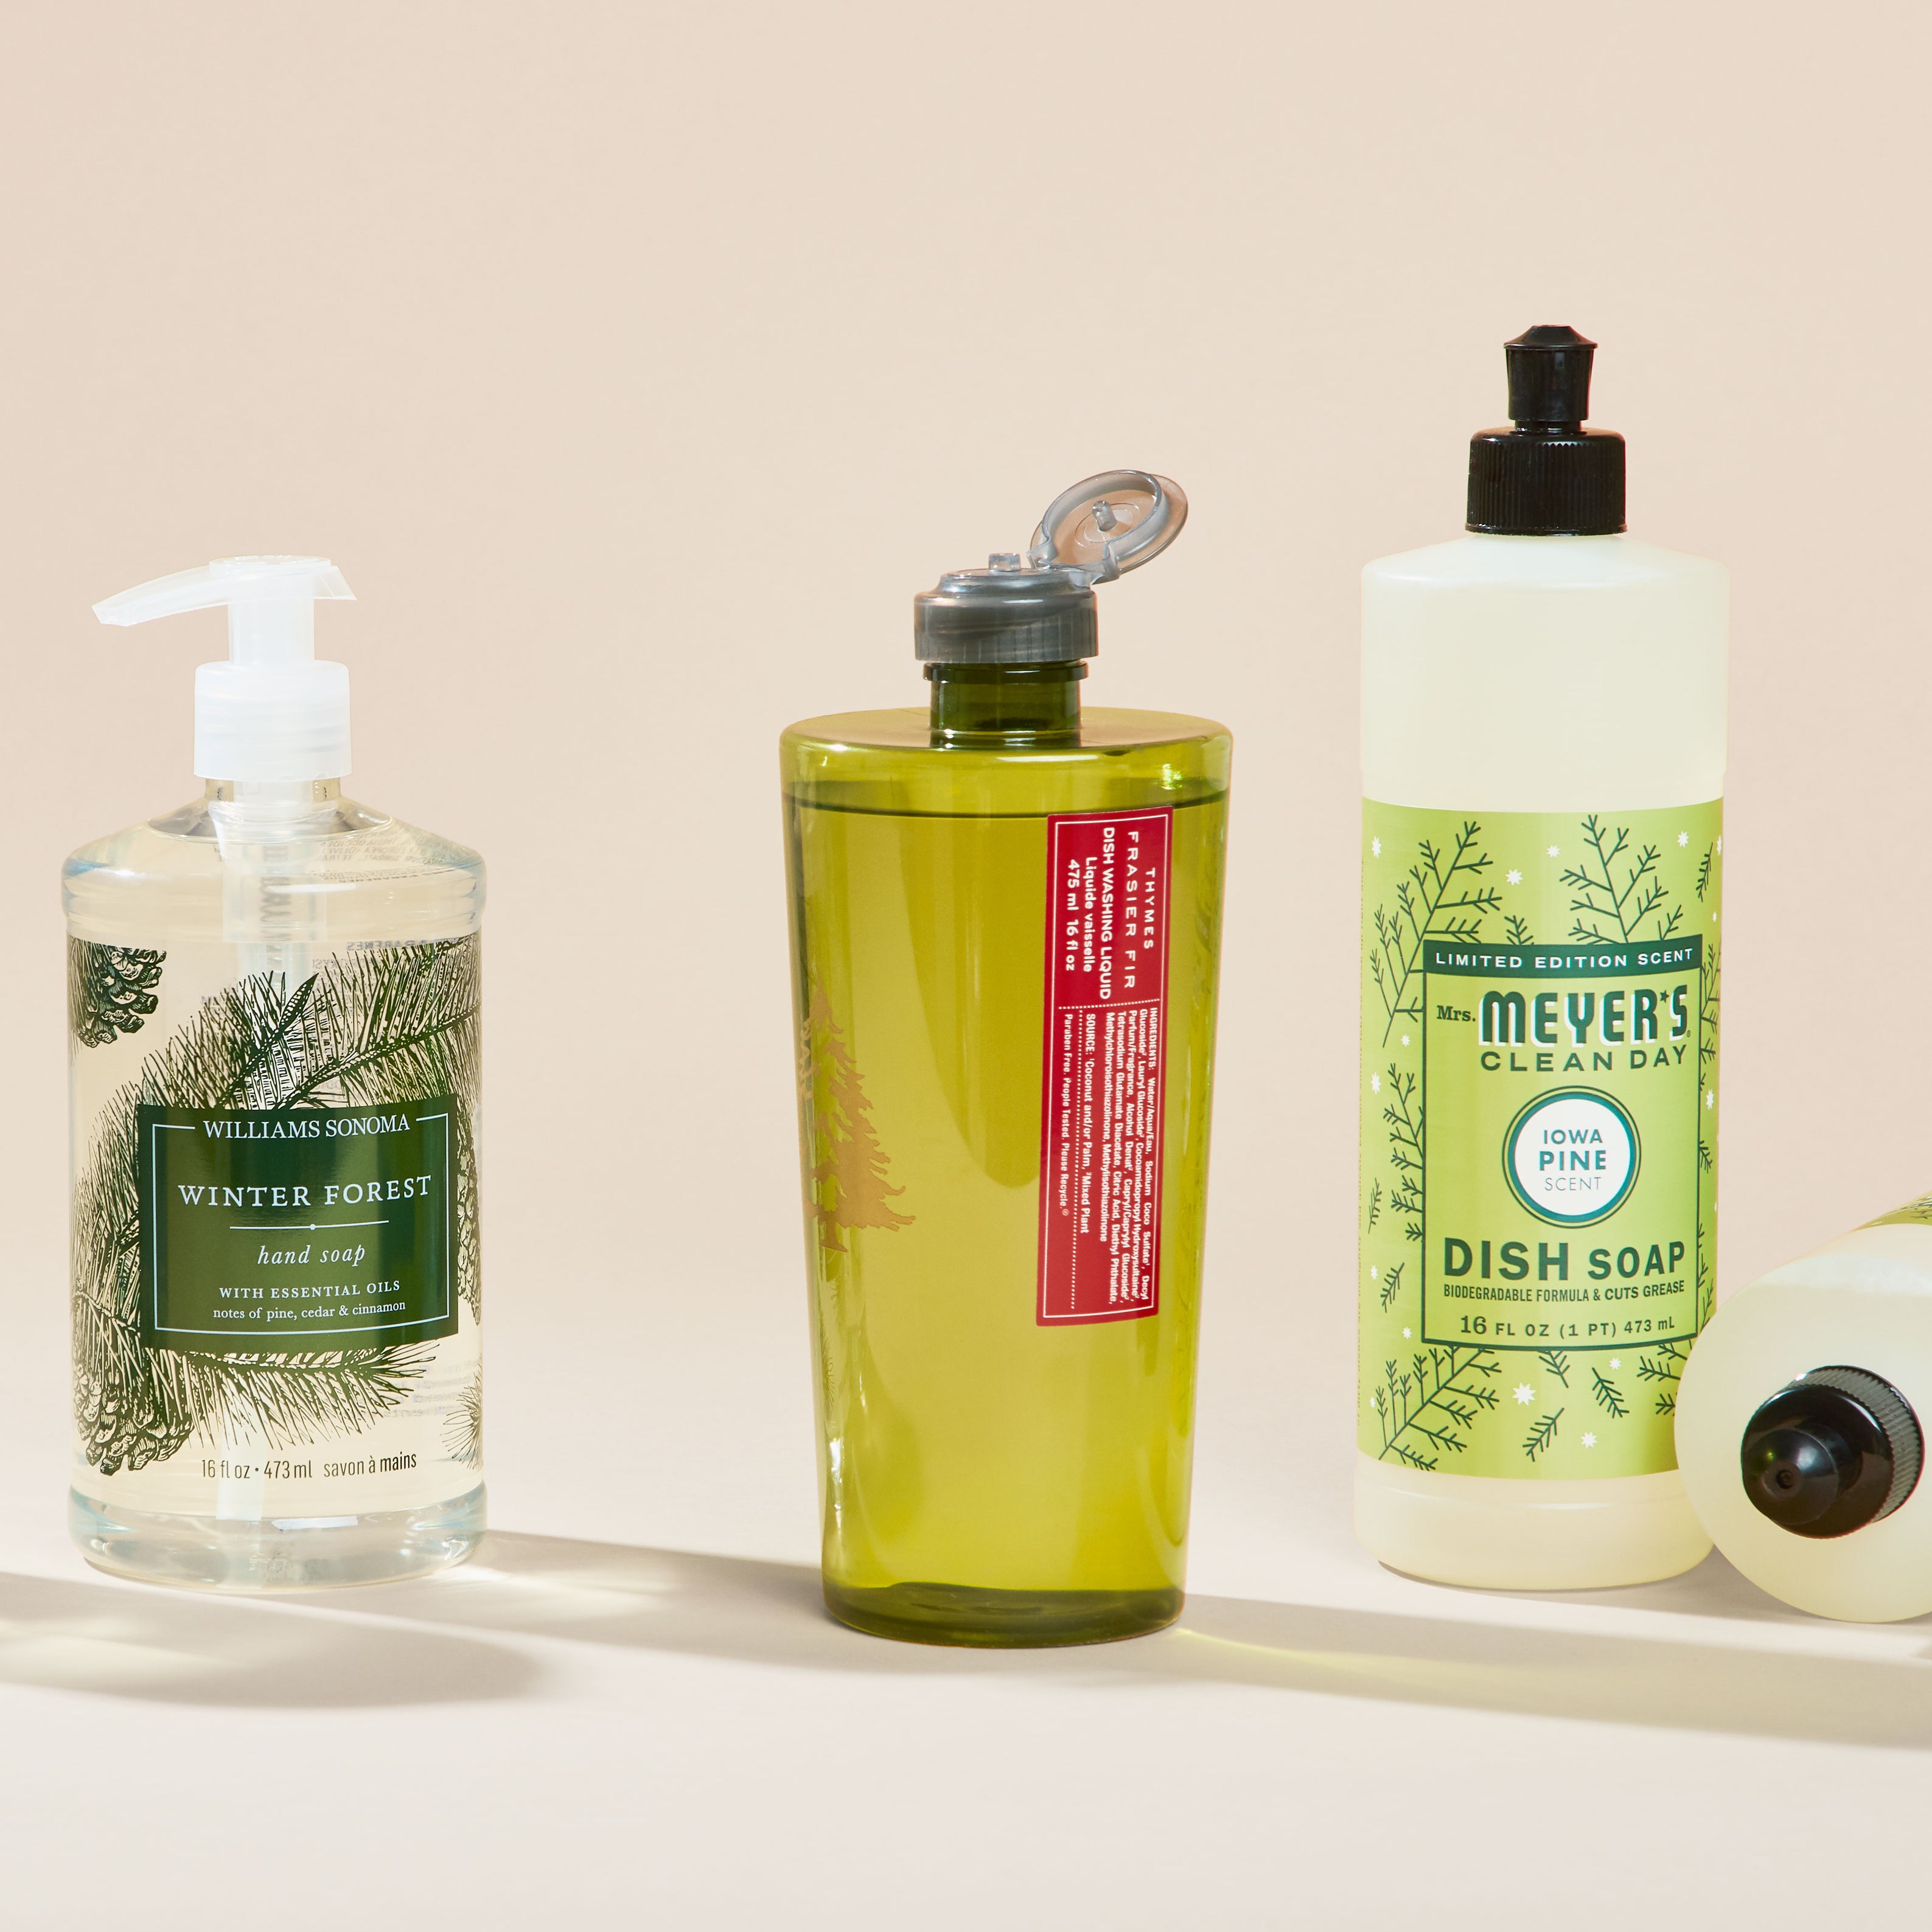 A Pine-Scented Dish Soap Buying Guide